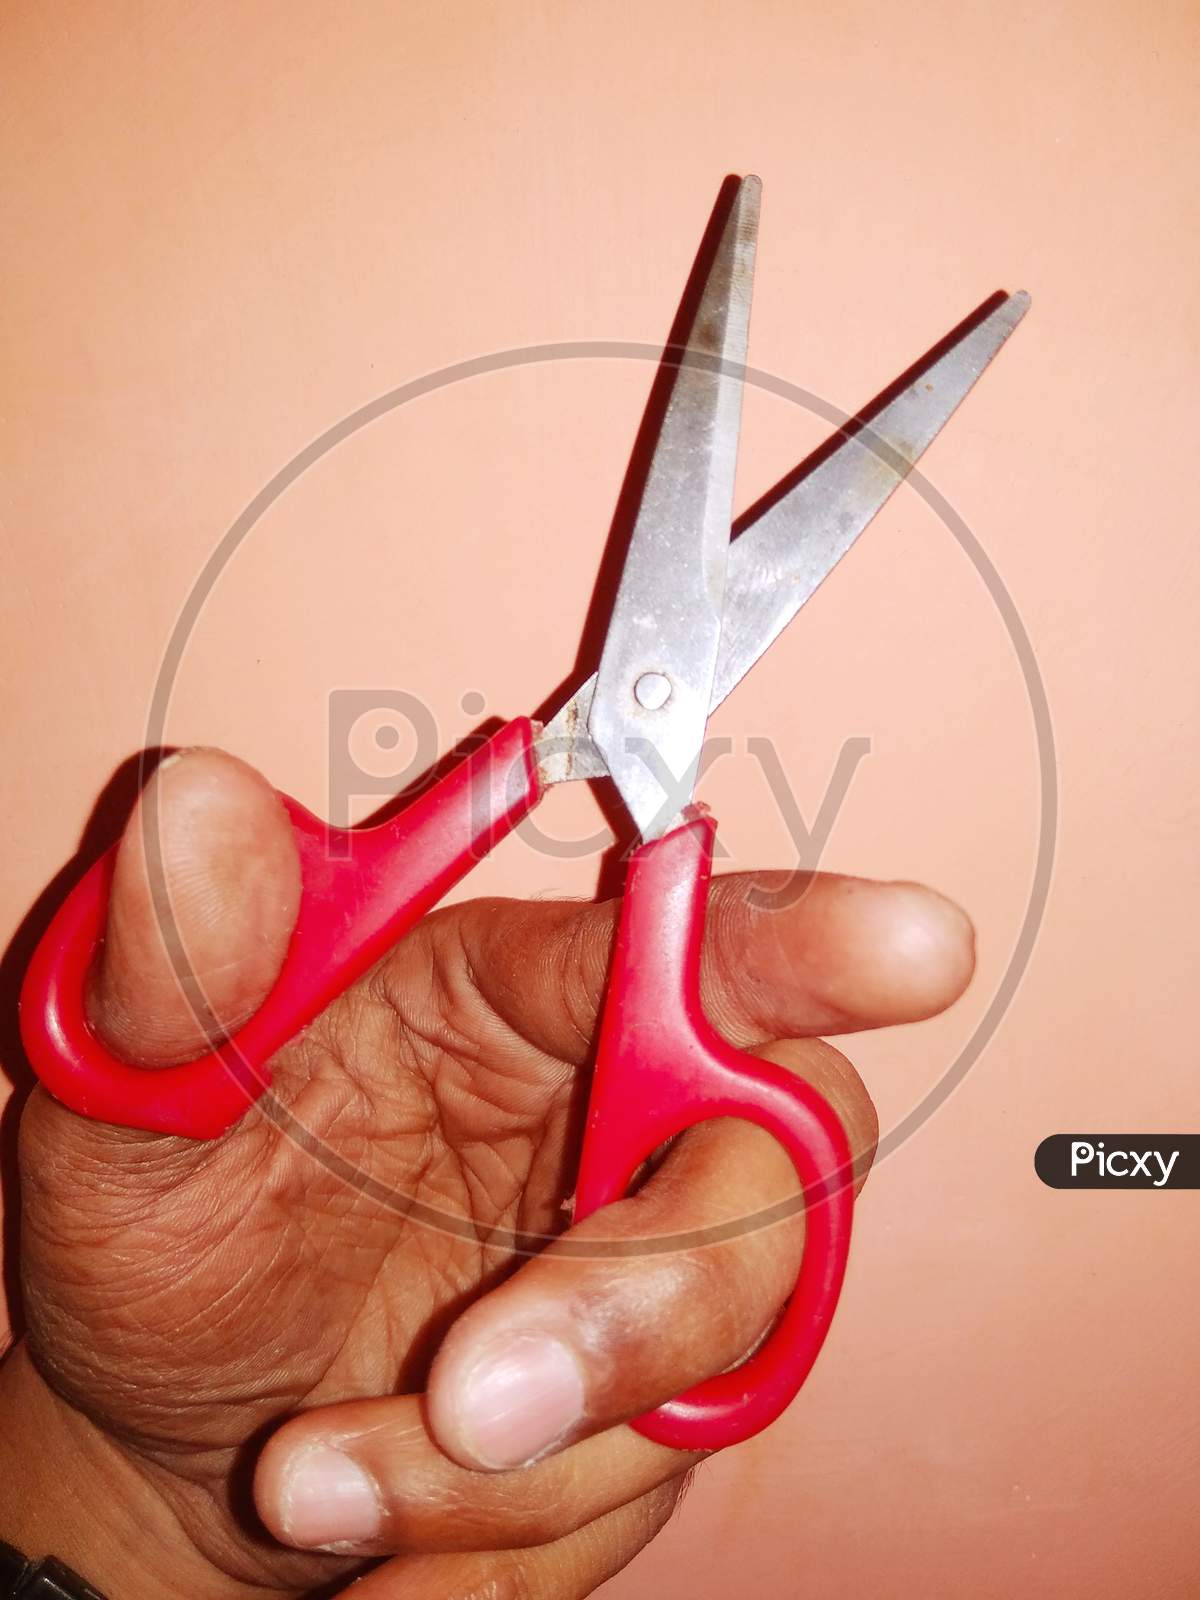 A man hand with the scissors